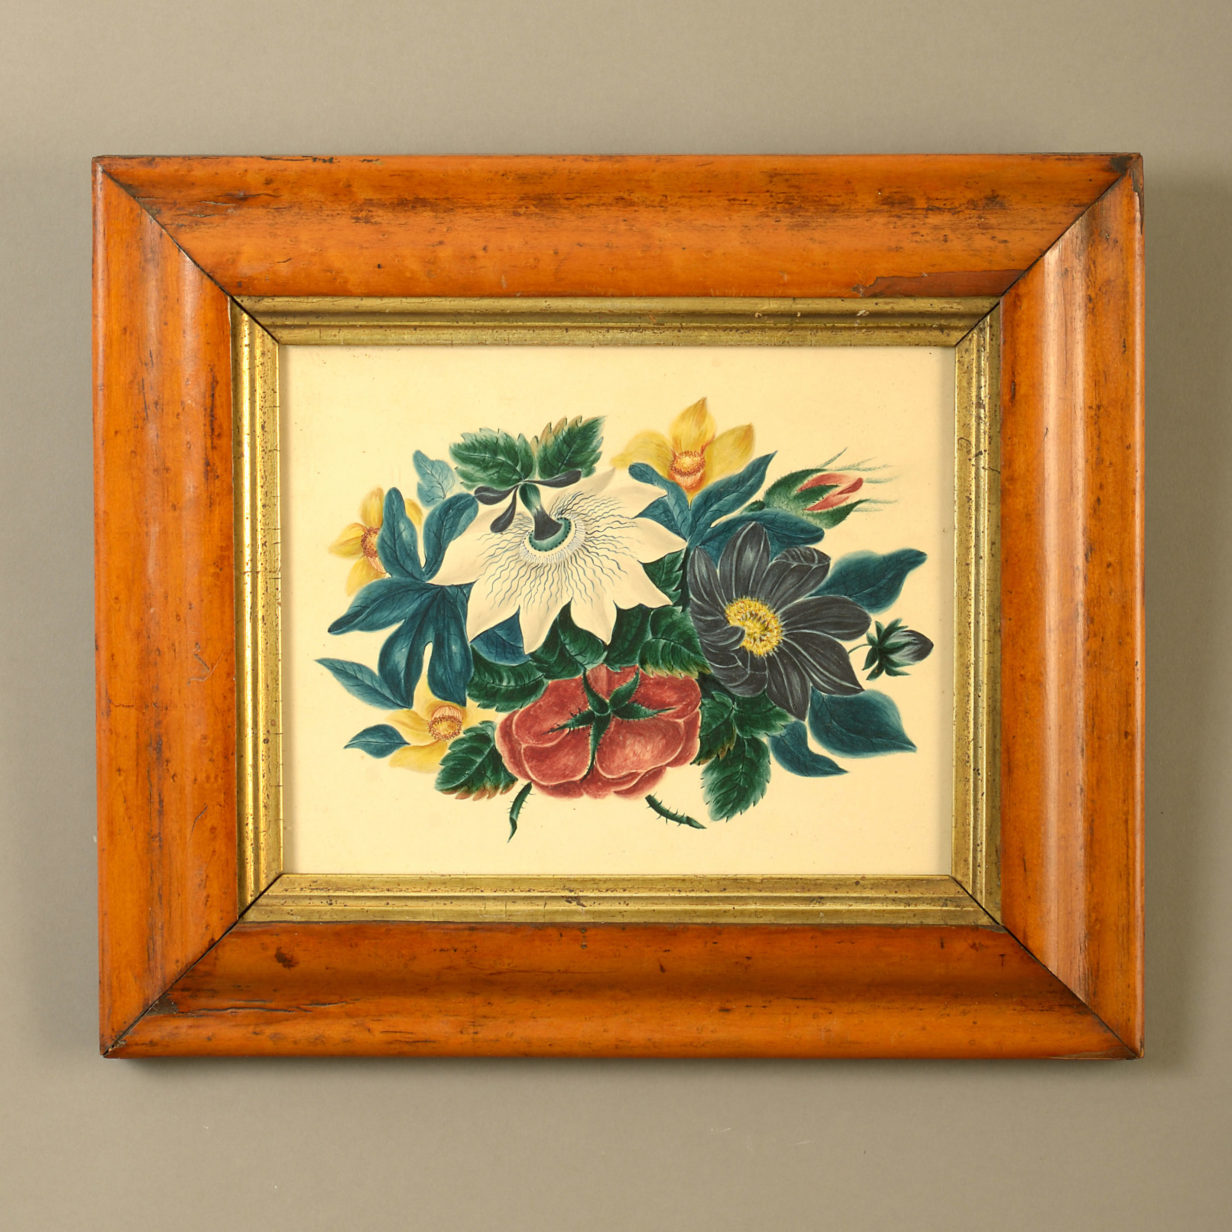 A mid-19th century victorian floral watercolour still life study